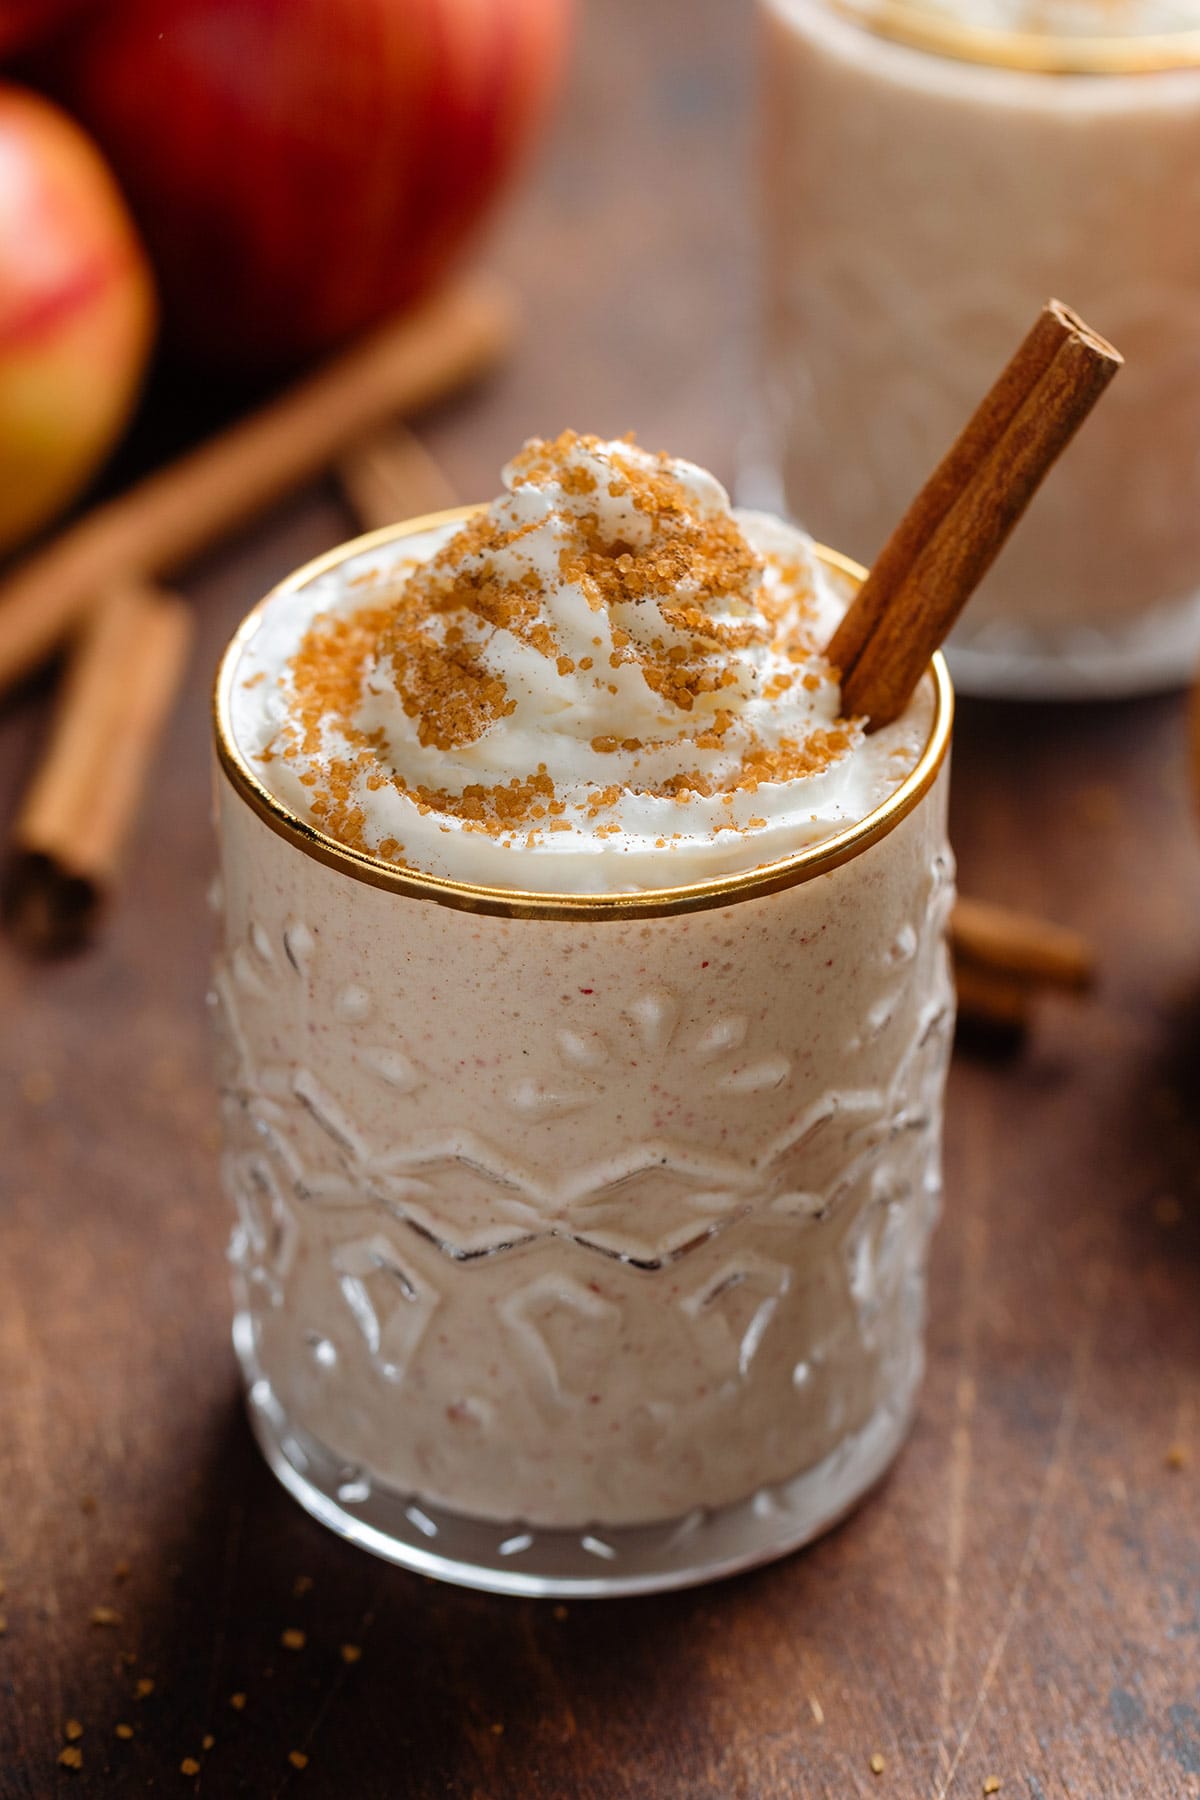 Apple pie smoothie with whipped cream and spiced sugar on top in a short glass with a gold rim garnished with a stick of cinnamon.